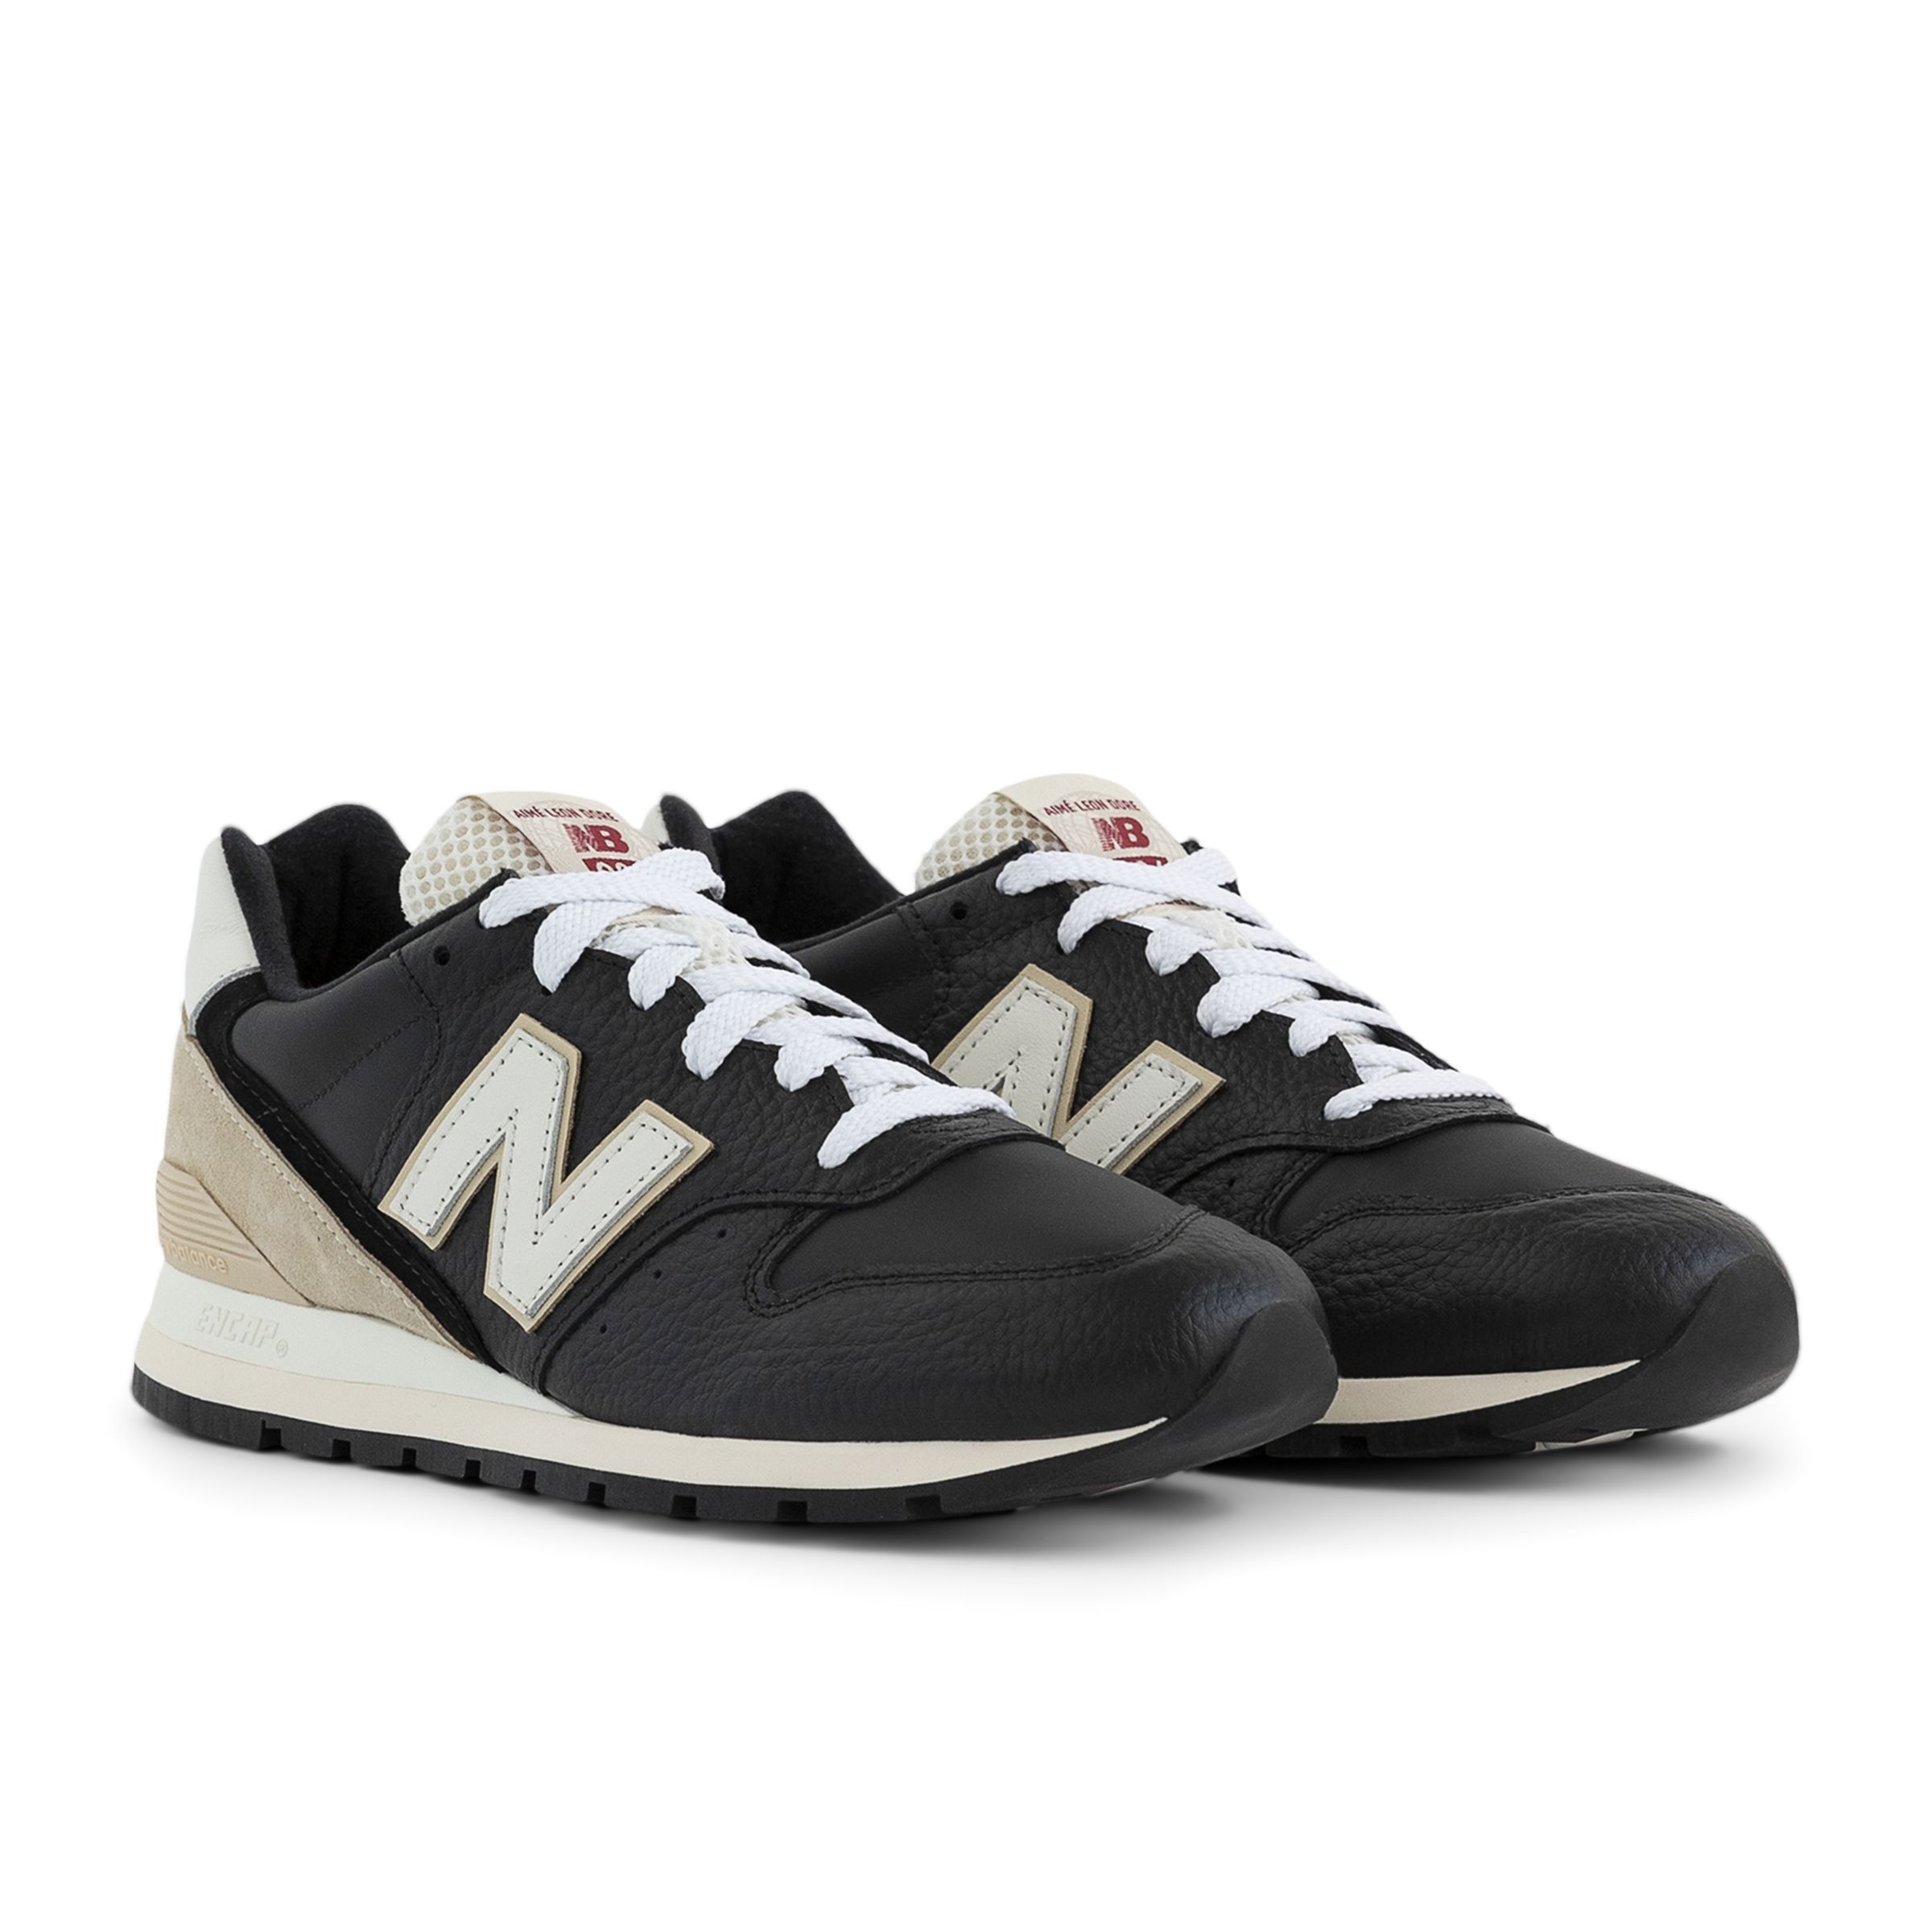 ALD x New Balance Made in USA 996 - Unisex 996 - Casual, - NB Team Sports -  US